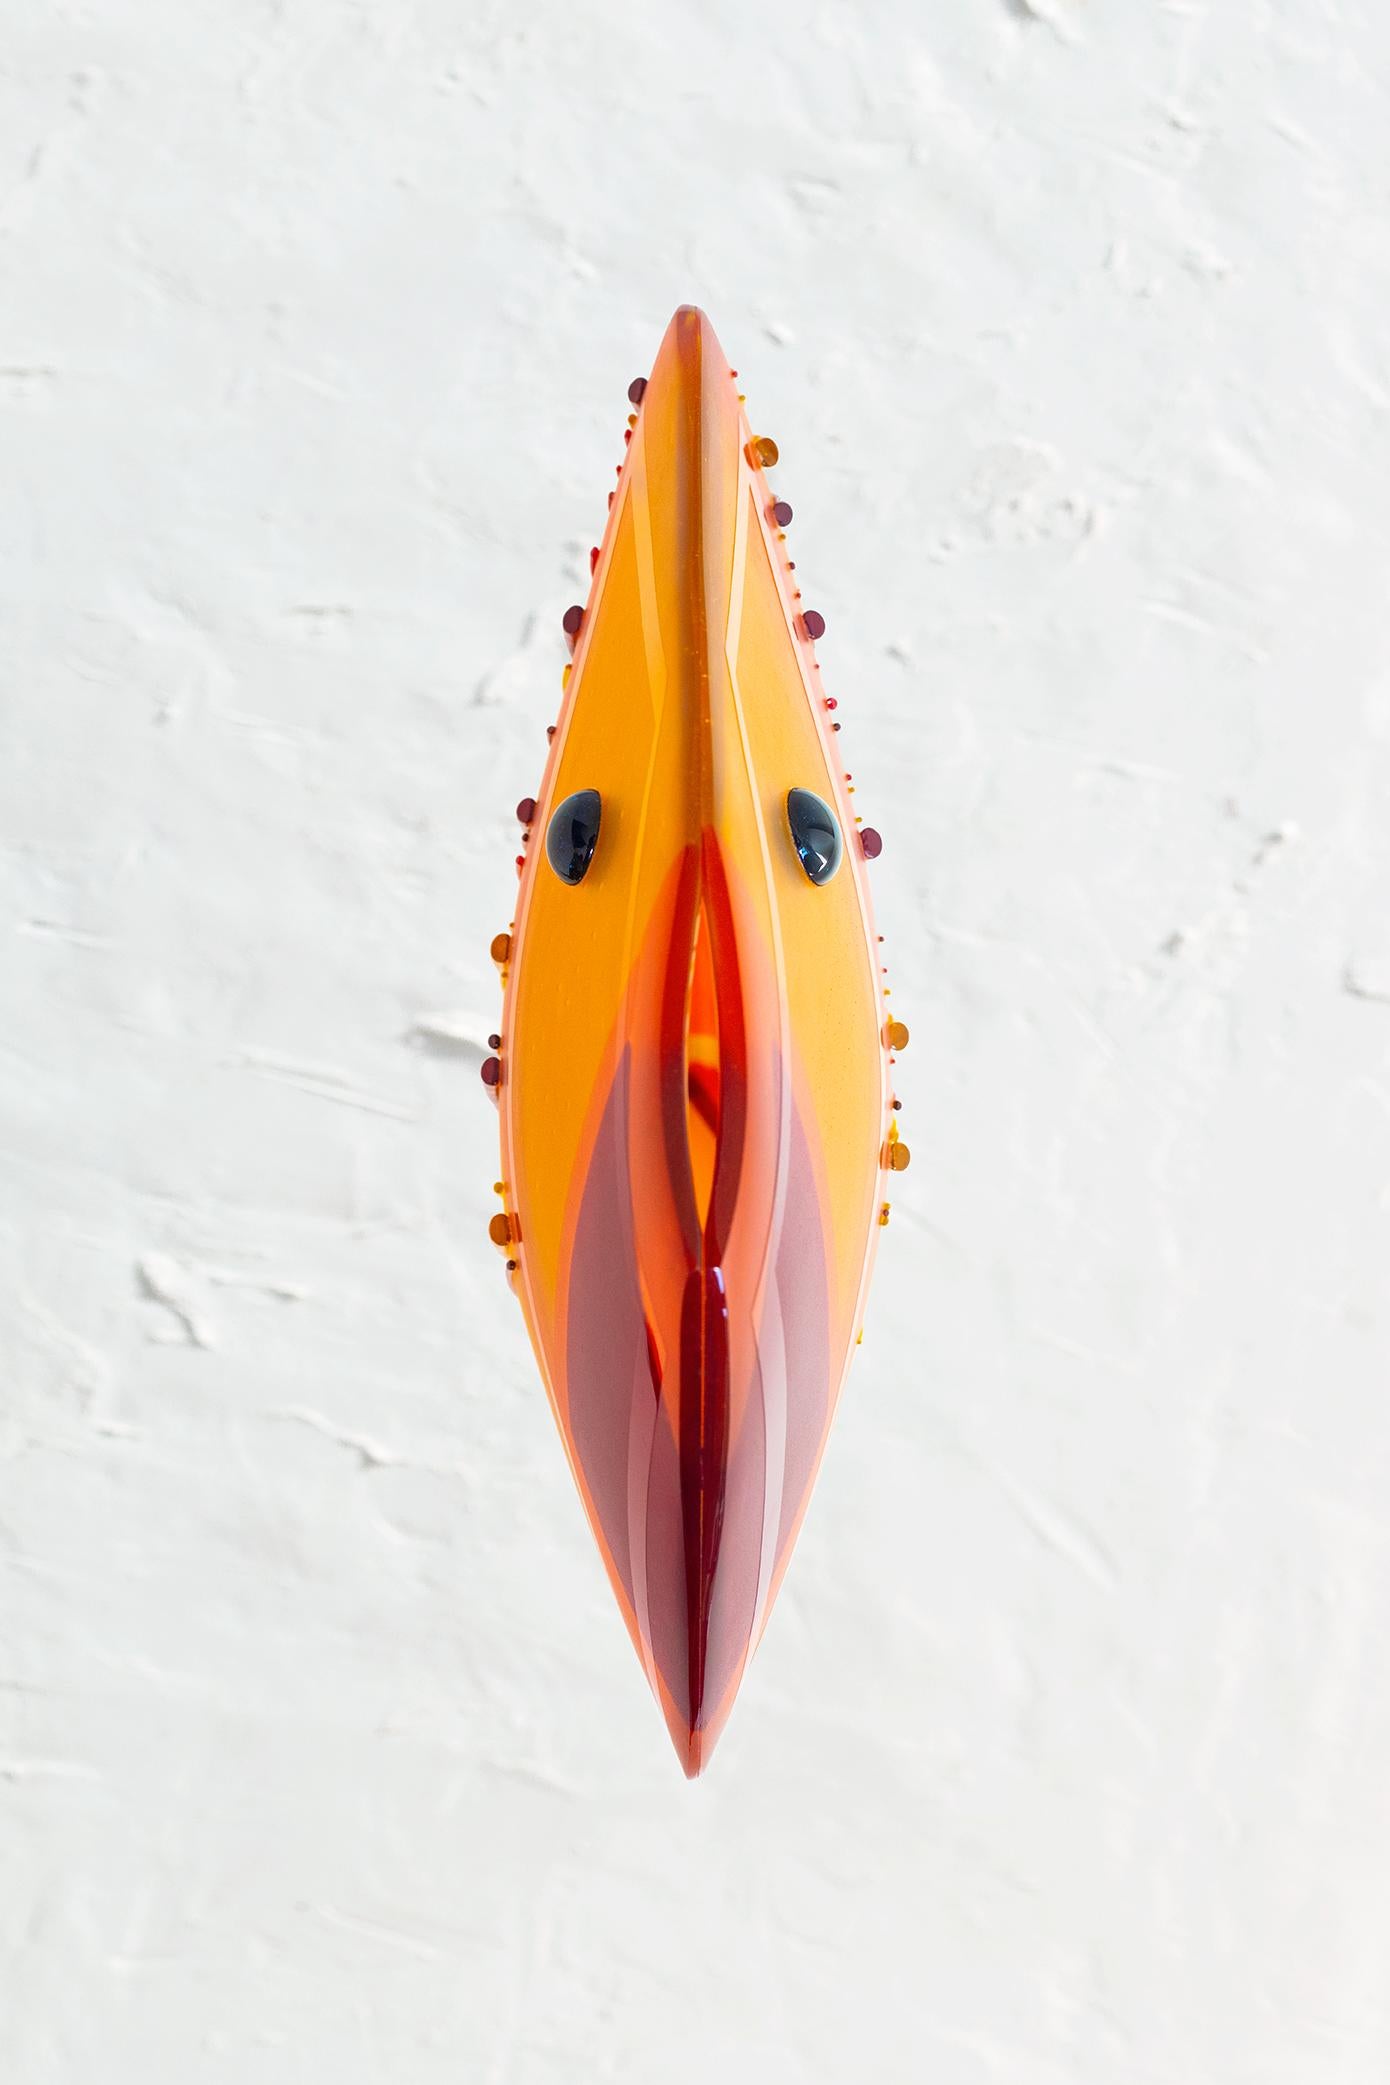 Red Sea is Presented by Il lacions

The graphic artist Delia Ruiz Malo challenged 40 Plumas to create a glass sculpture inspired by her illustrations. They immediately fell in love with her work Colorful Fish and decided to work on a detail of warm